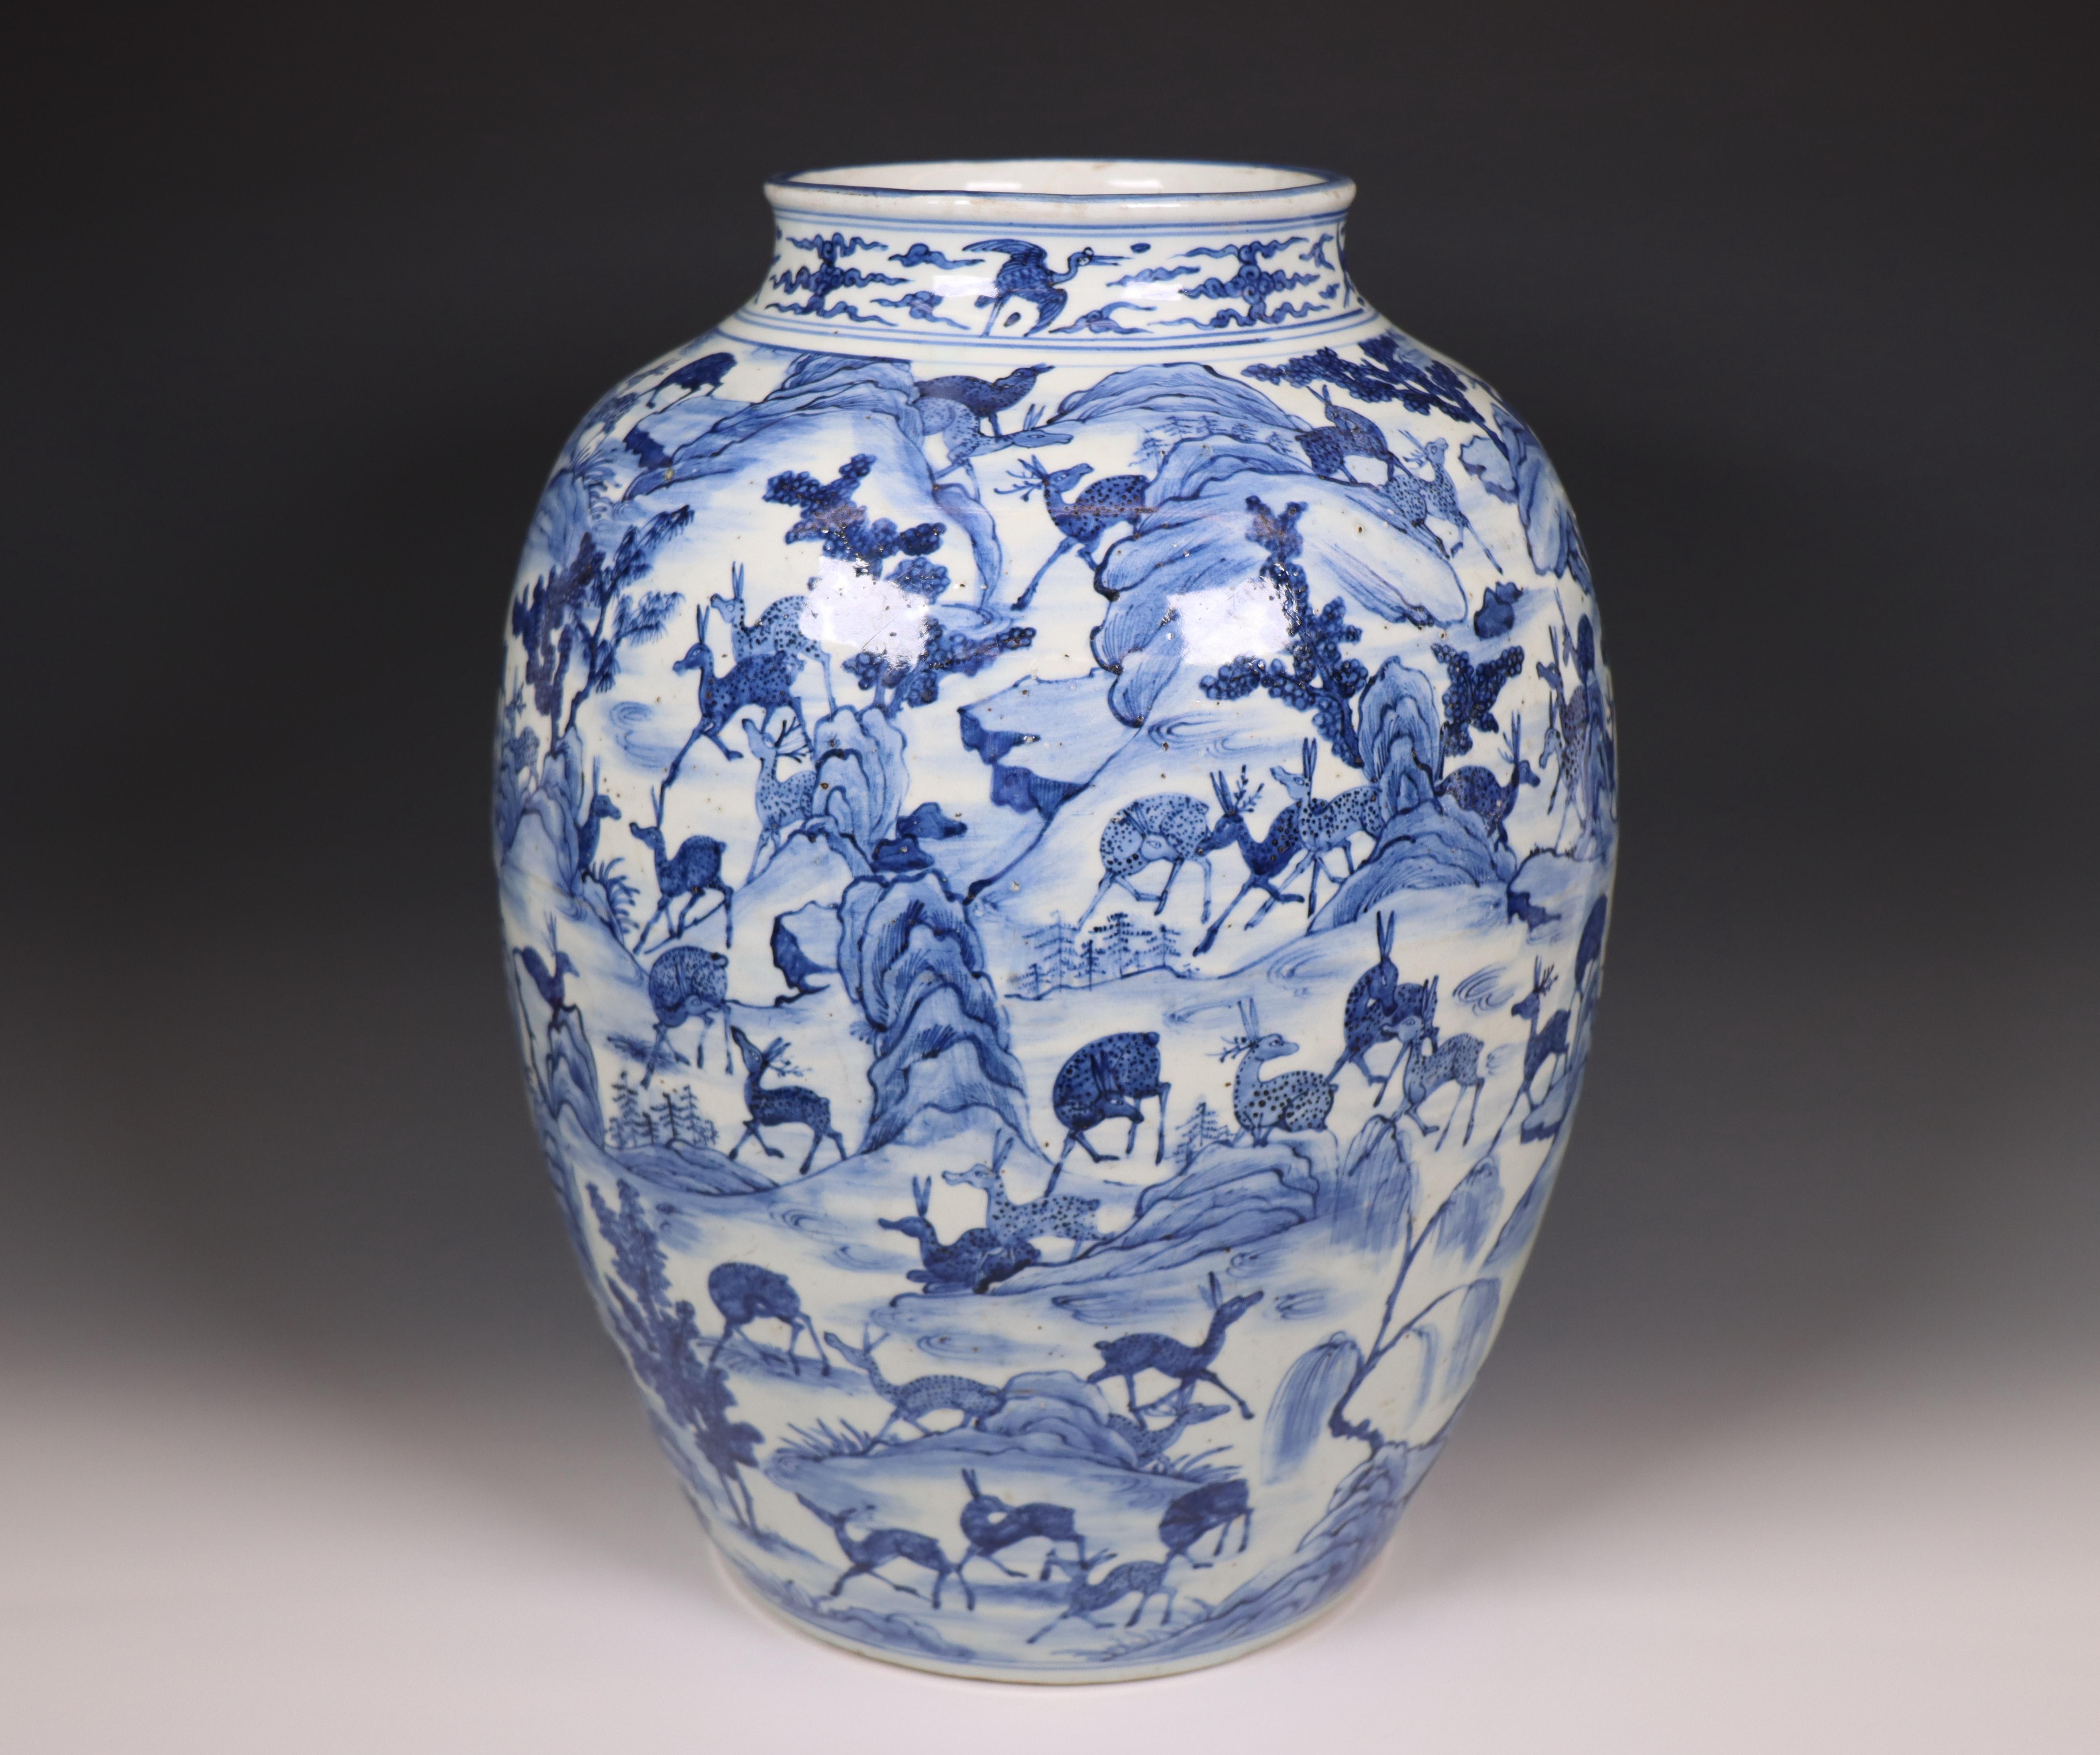 China, blue and white porcelain 'one hundred deer' baluster vase, late Qing dynasty (1644-1912), - Image 2 of 6